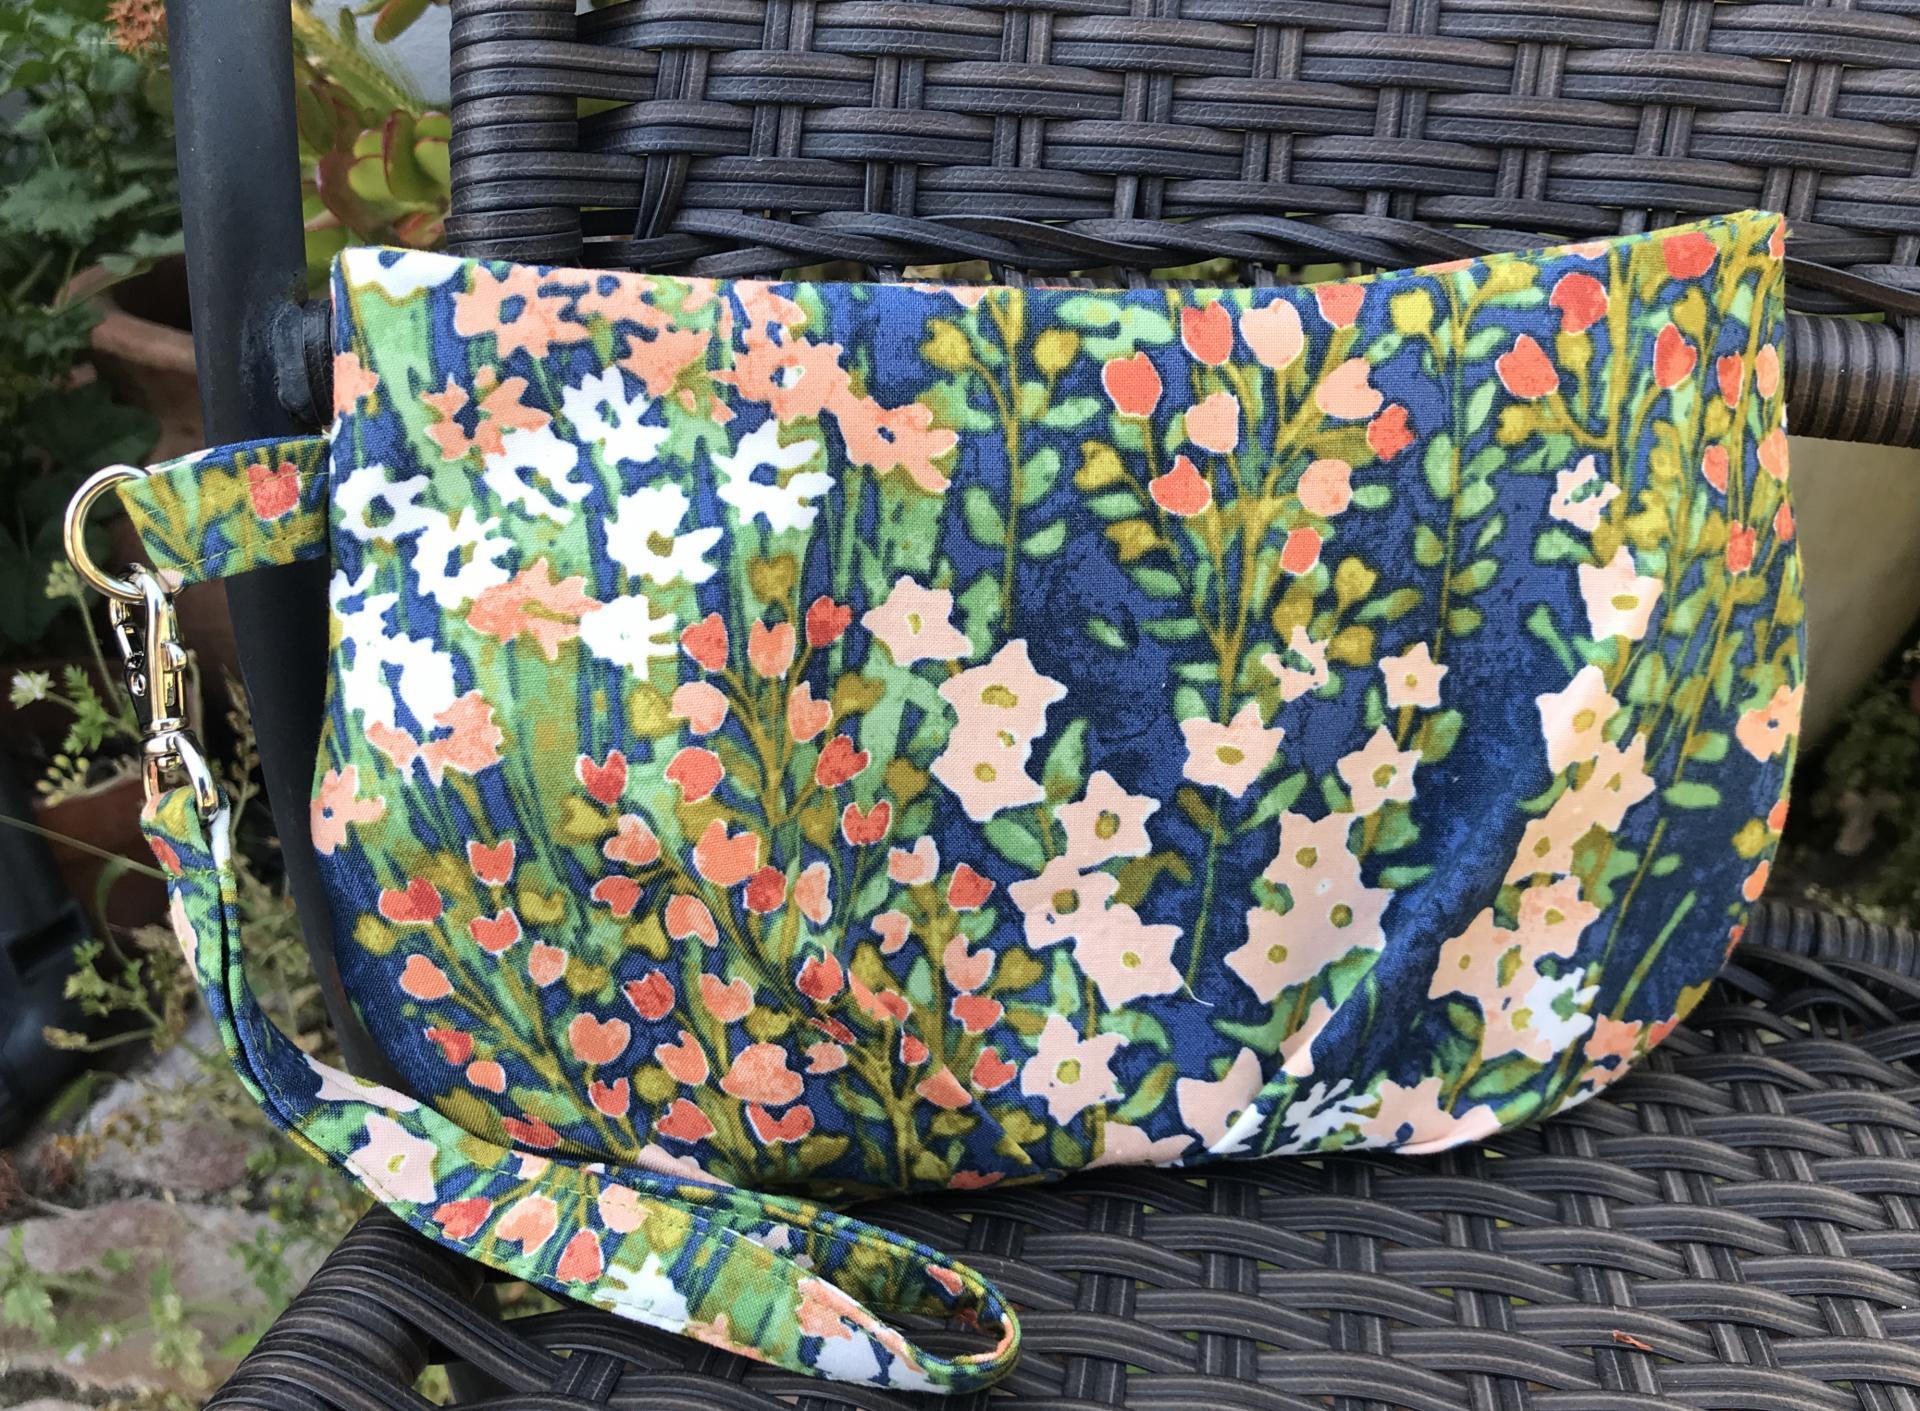 Pleated floral wristlet clutch purse, recessed zipper top, removable swivel wrist strap, cosmetic bag, make up pouch, bridesmaid gift, garden wedding, blue green peach orange flowers